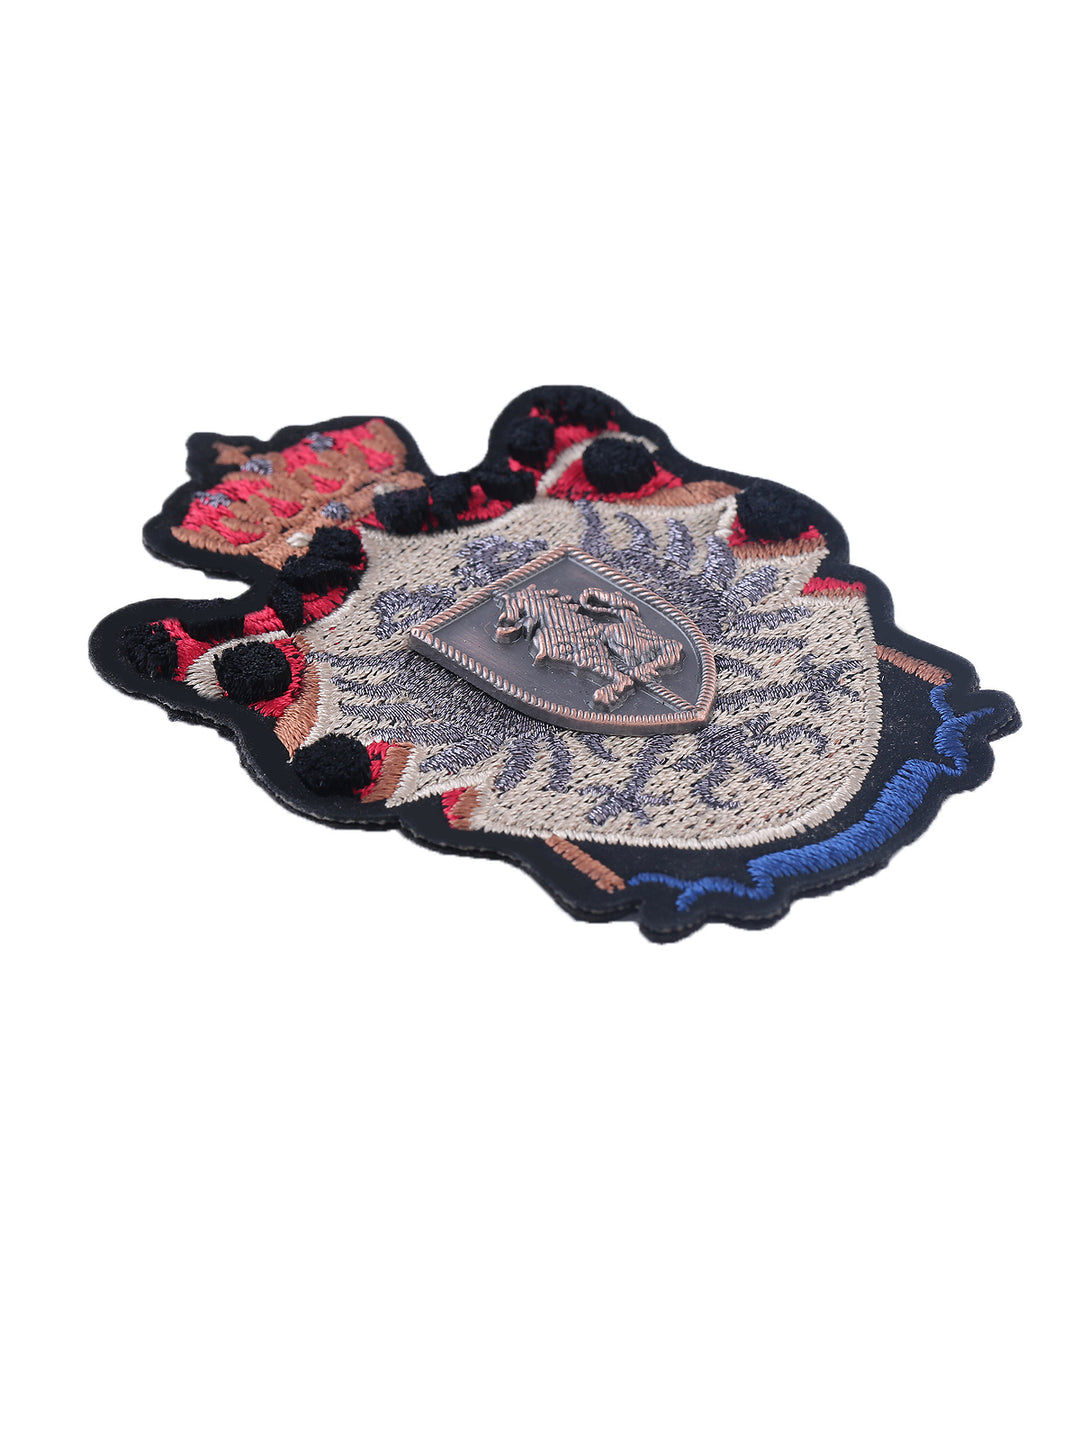 Elegant Lion Rampant & Crown Badge Embroidery Patch